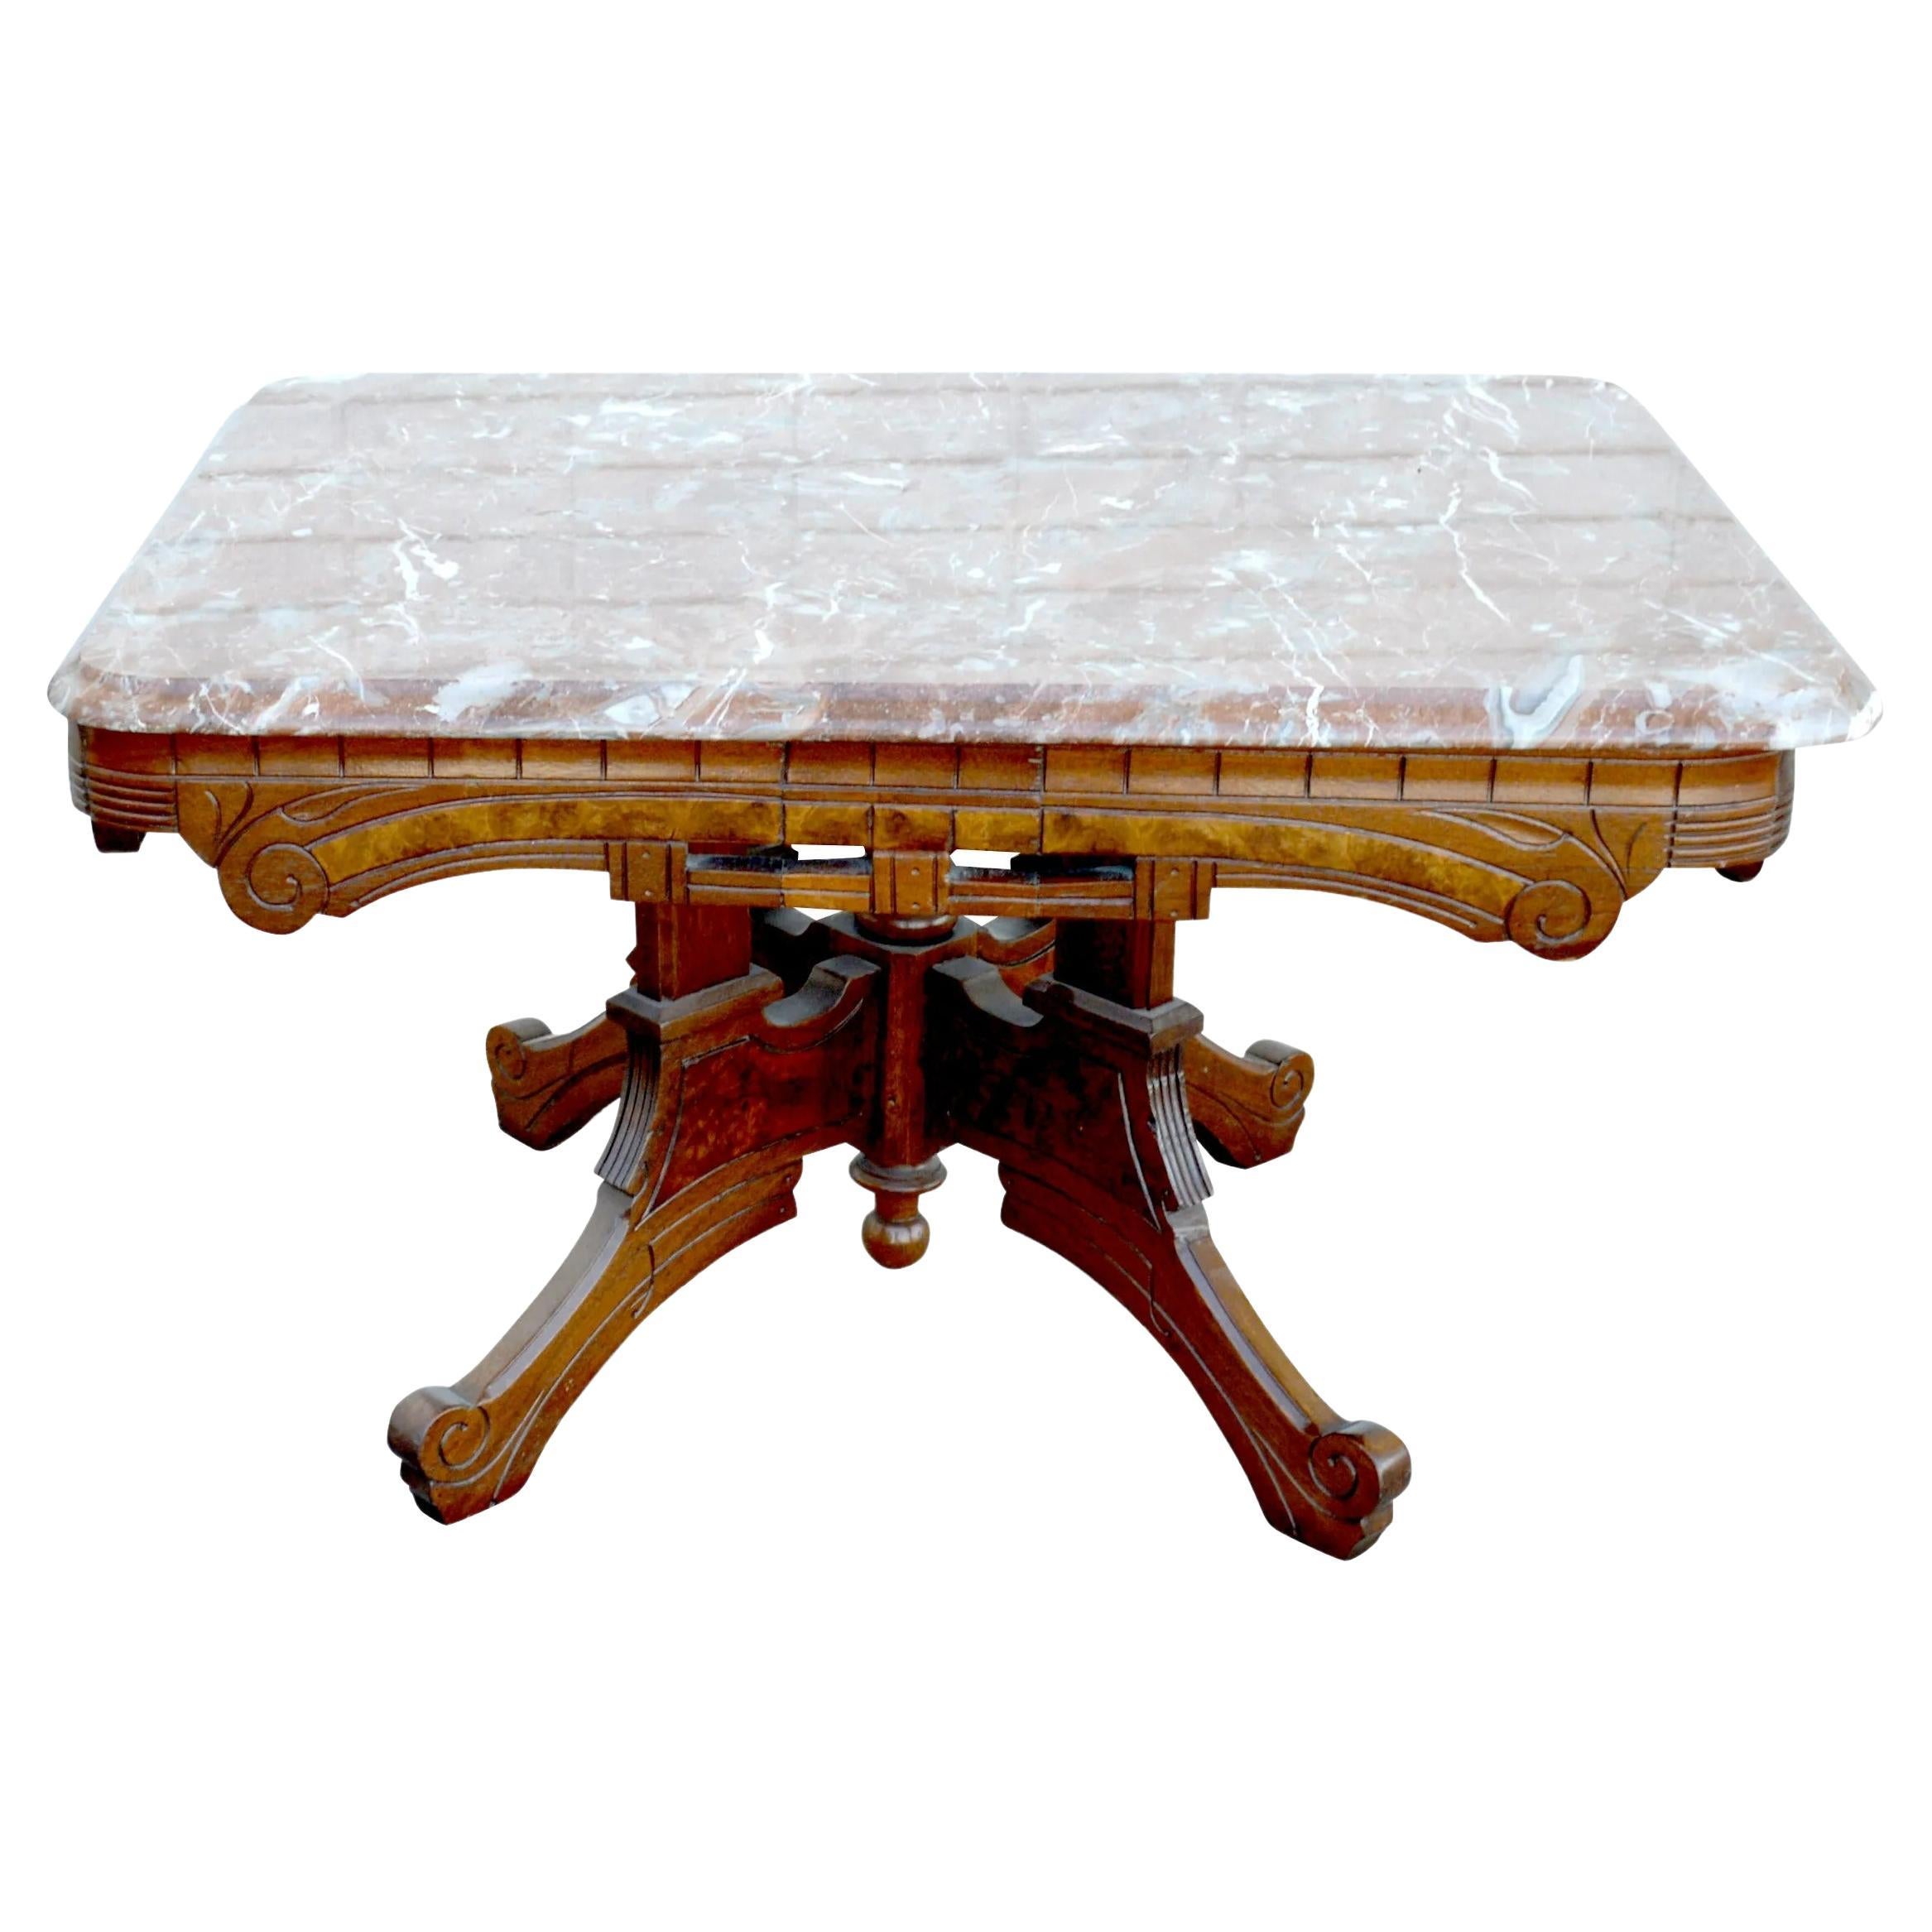 Antique Victorian Eastlake Coffee Table

Carved and incised walnut with a beveled Breccia marble top in rich amber, grey and cream tones.
The base features scalloped aprons and four shaped legs with a turned center column and drop finial.
 